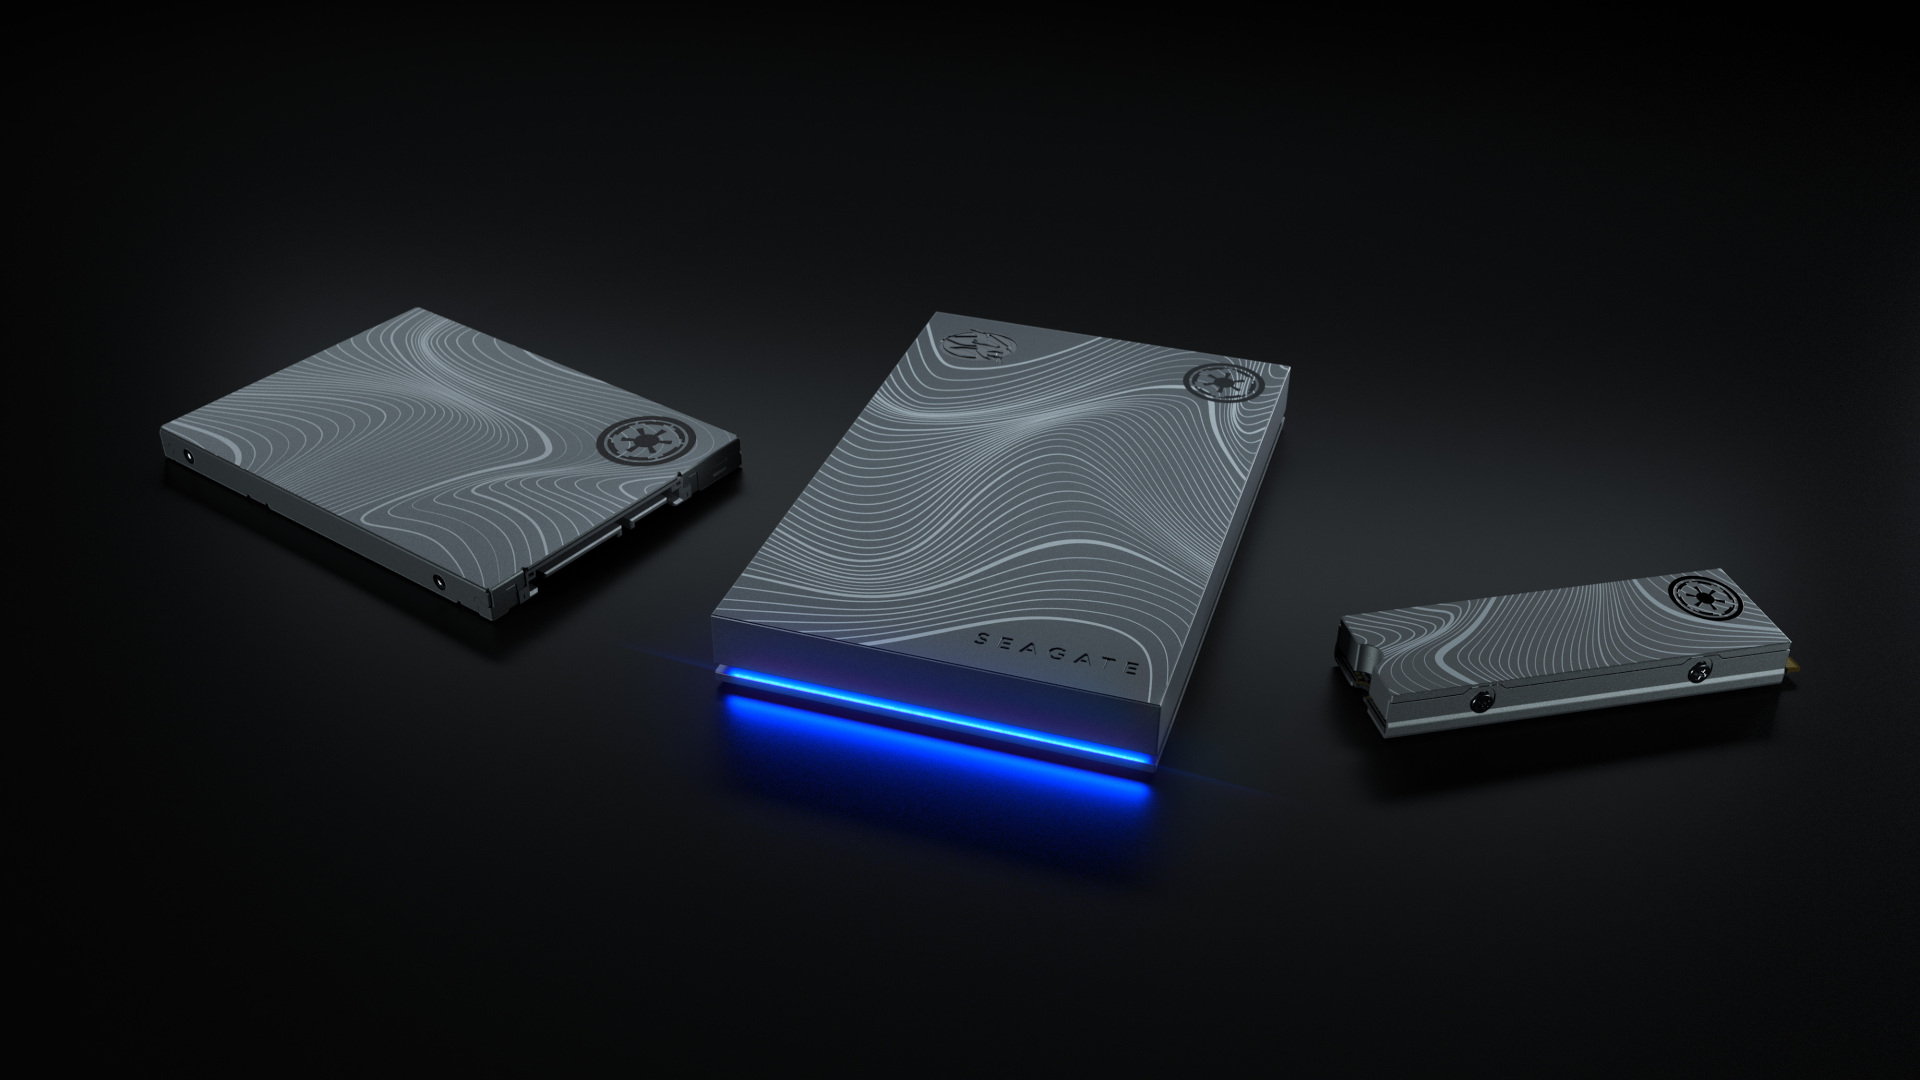 Seagate creates Star Wars SSDs inspired by The Mandalorian